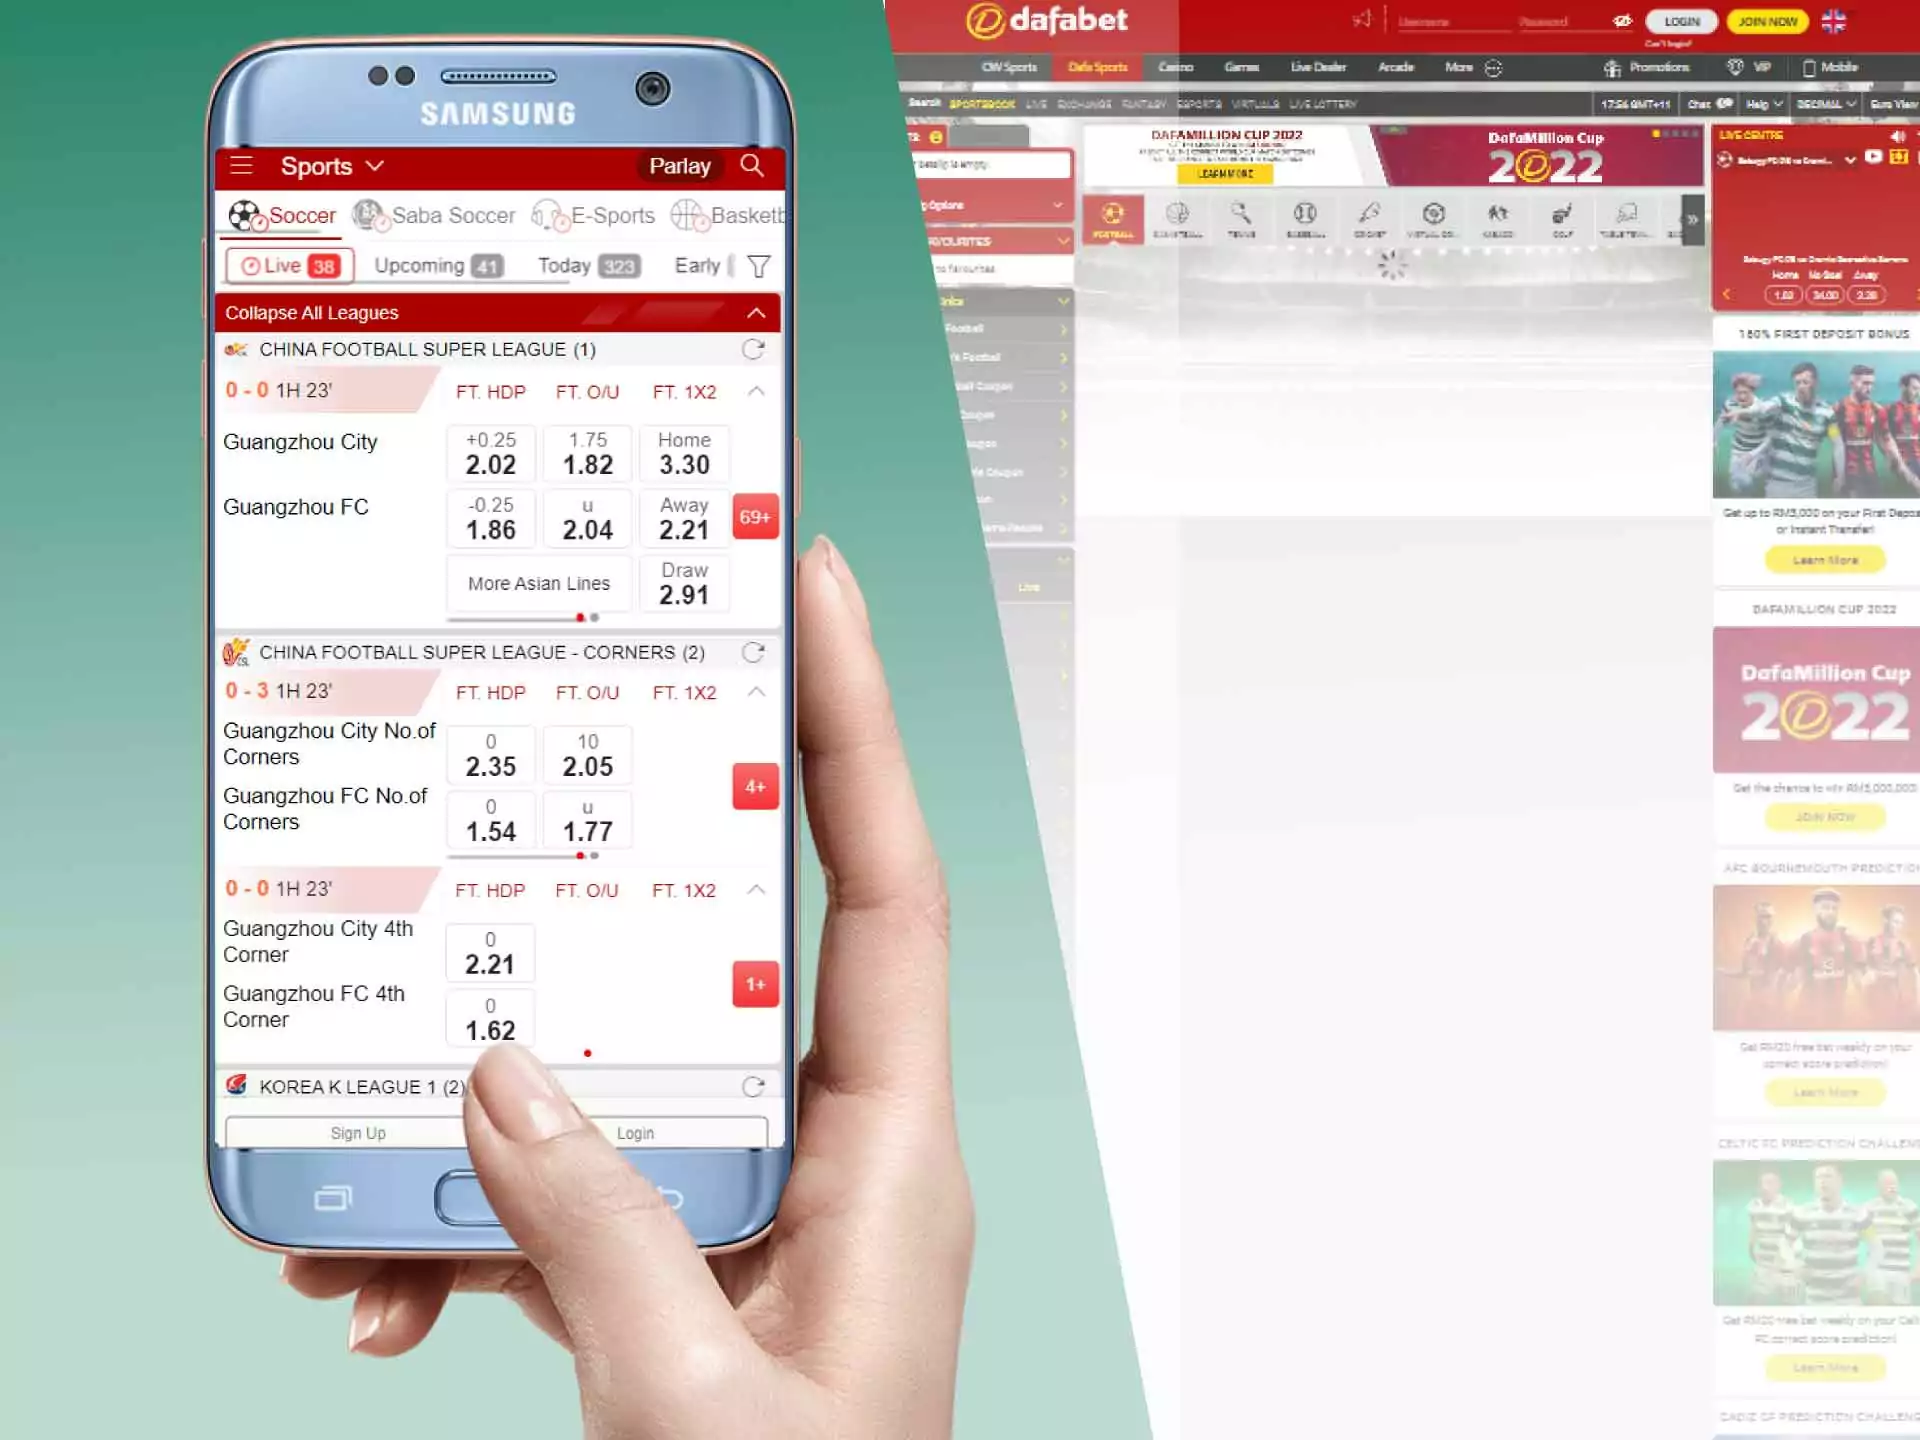 Dafabet has a mobile version that you can open via browser.